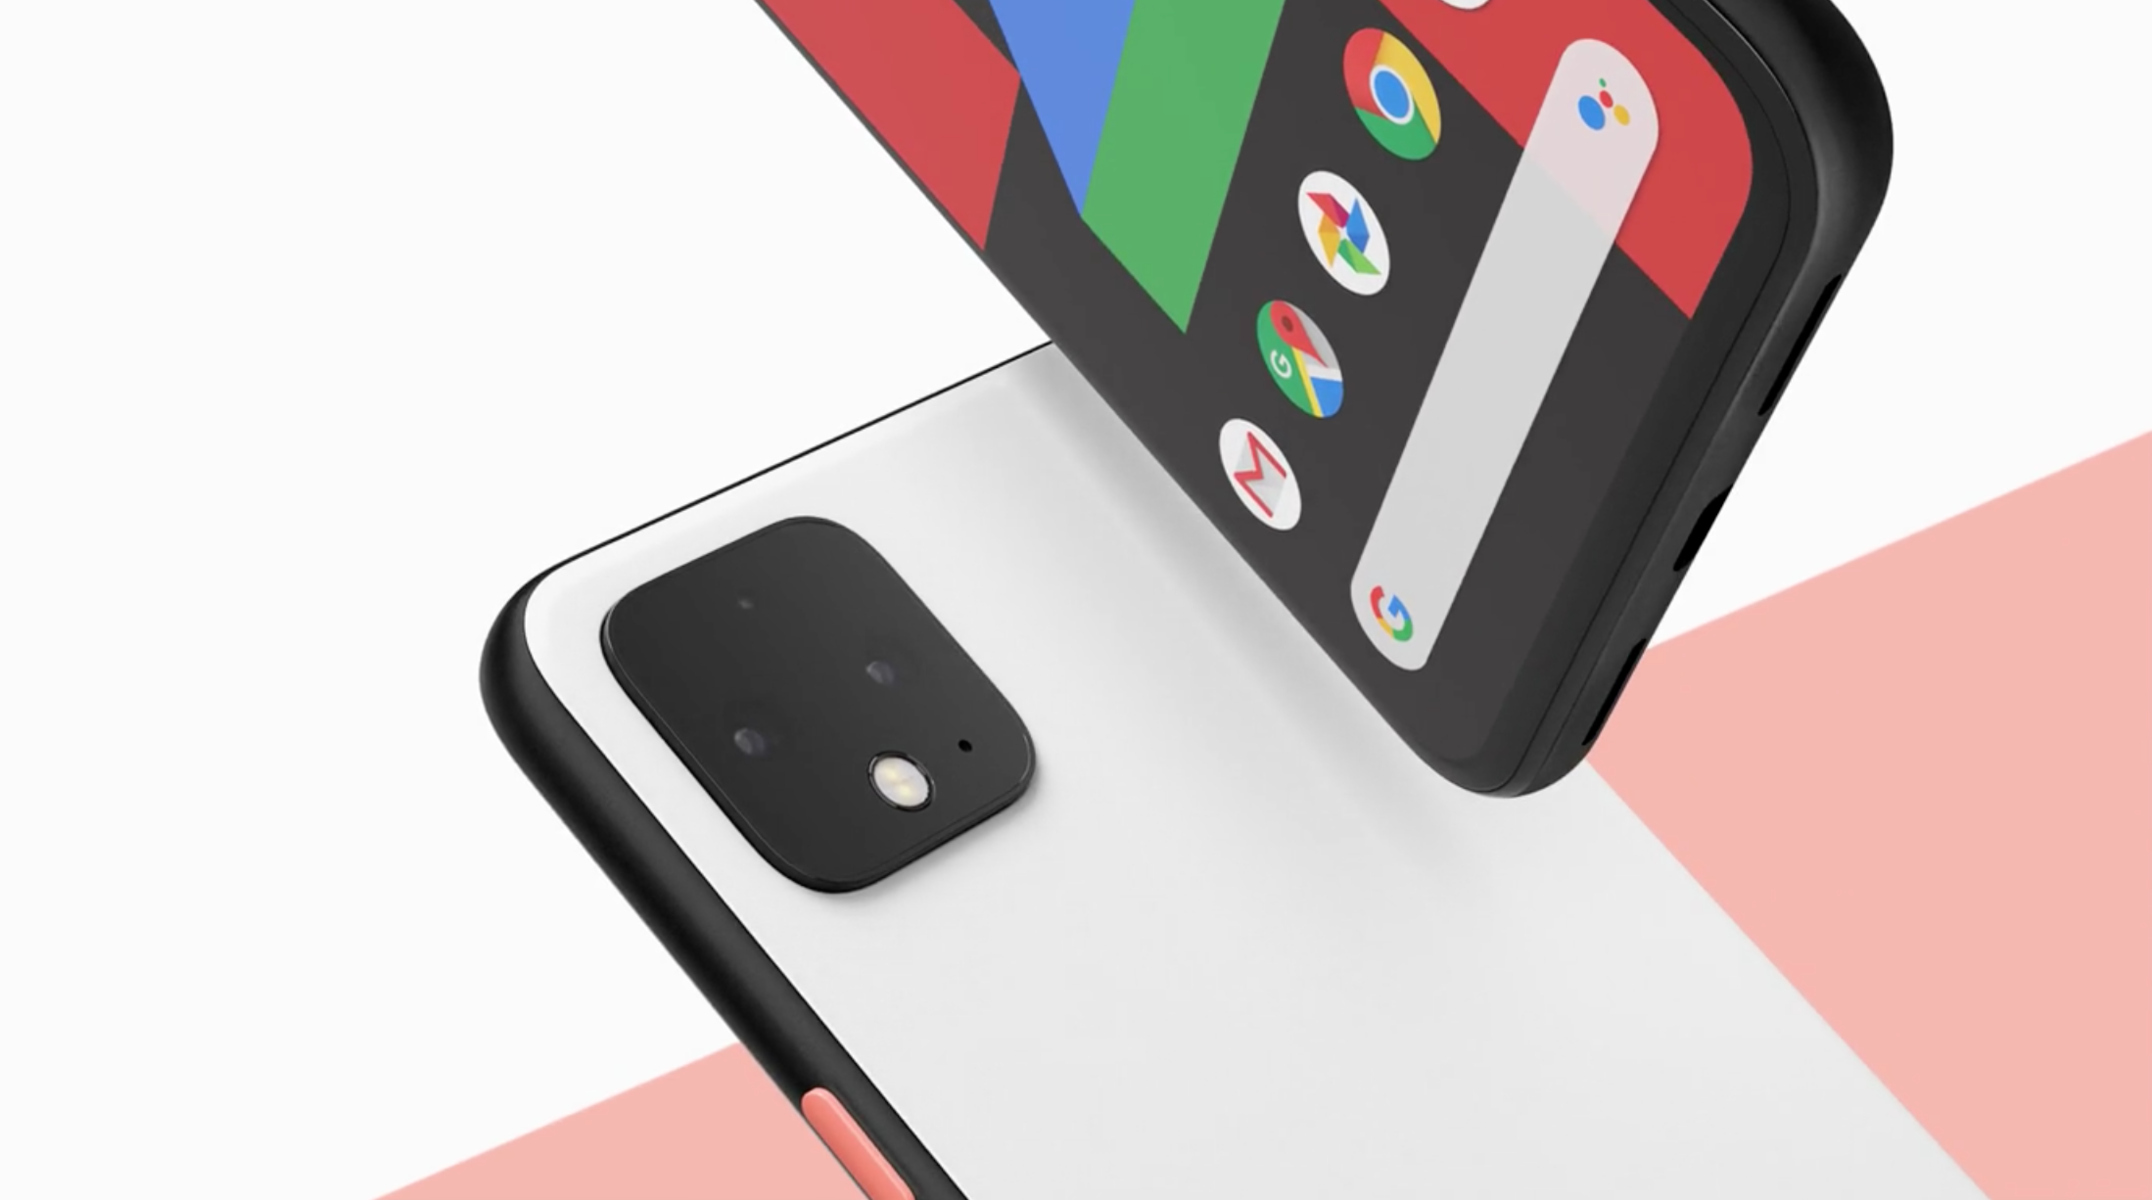 Joining Sprint: Activating Pixel 4 XL Made Easy